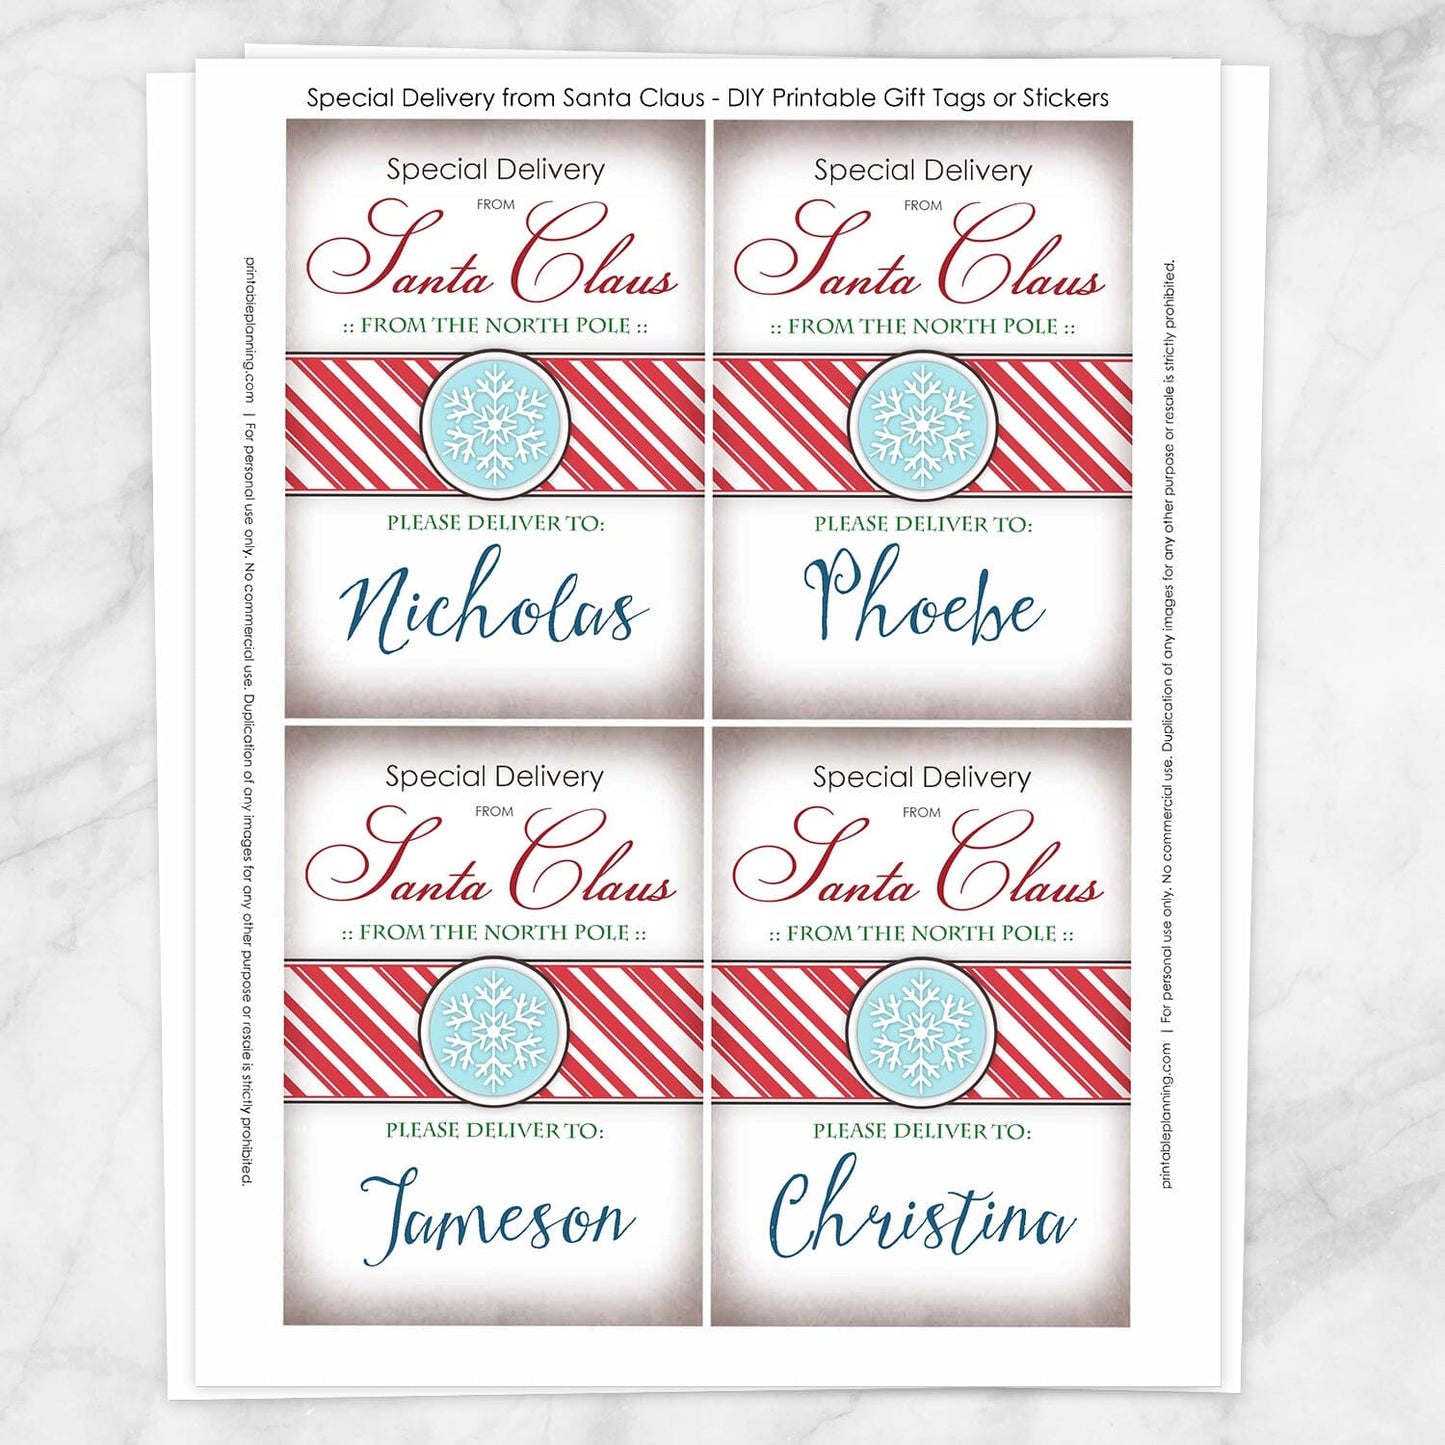 Printable Special Delivery from Santa Claus - Personalized Gift Tags or Stickers at Printable Planning. Sheet of 4.